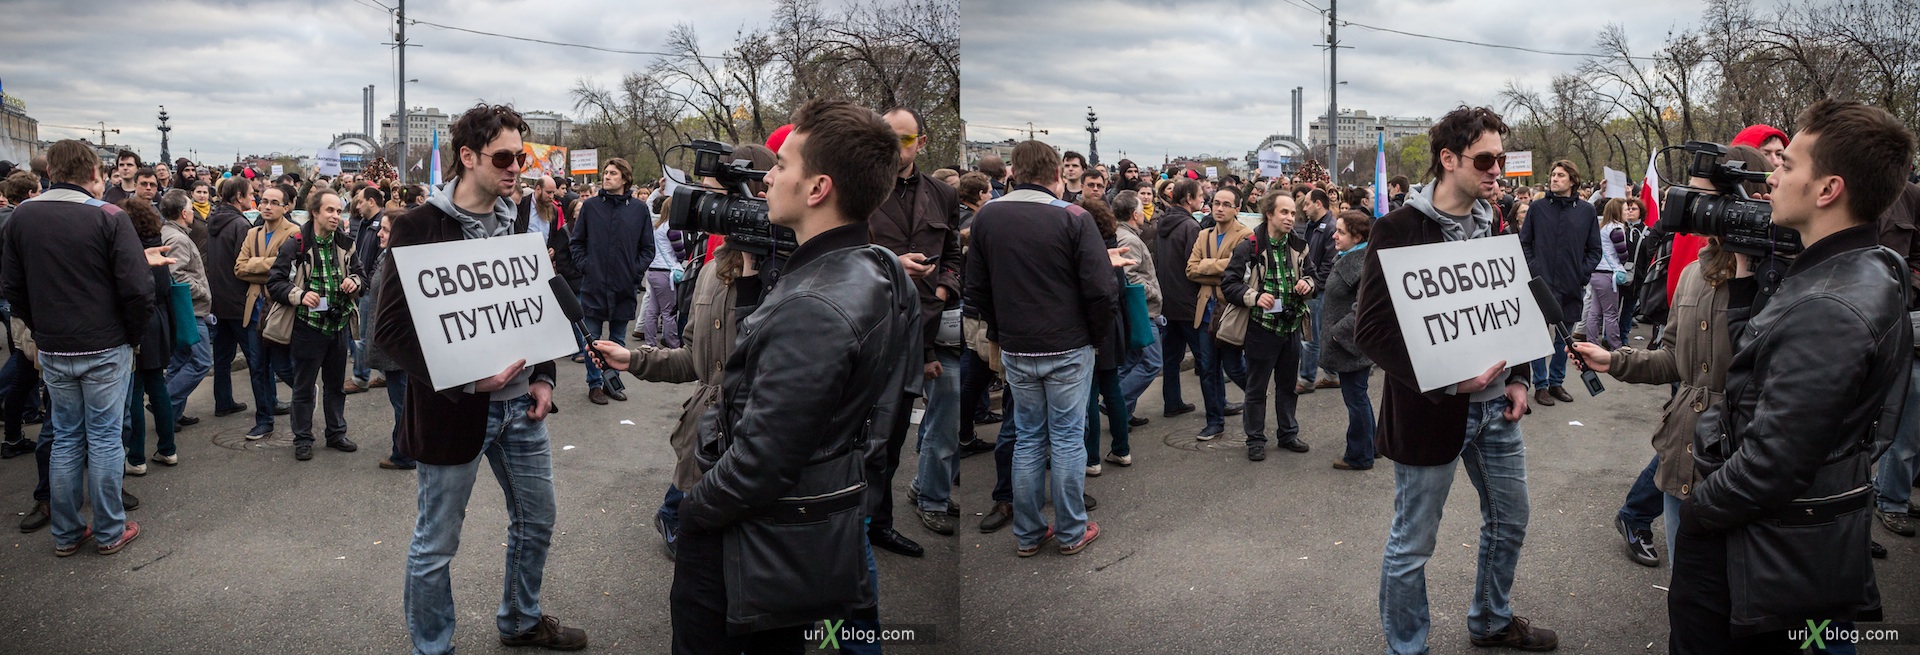 2013, Russia, Moscow, Demonstration, Rally, Meeting, protest, Bolotnaya square, Putin, Navalny, Politics, political prisoners, 3D, stereo pair, cross-eyed, crossview, cross view stereo pair, stereoscopic